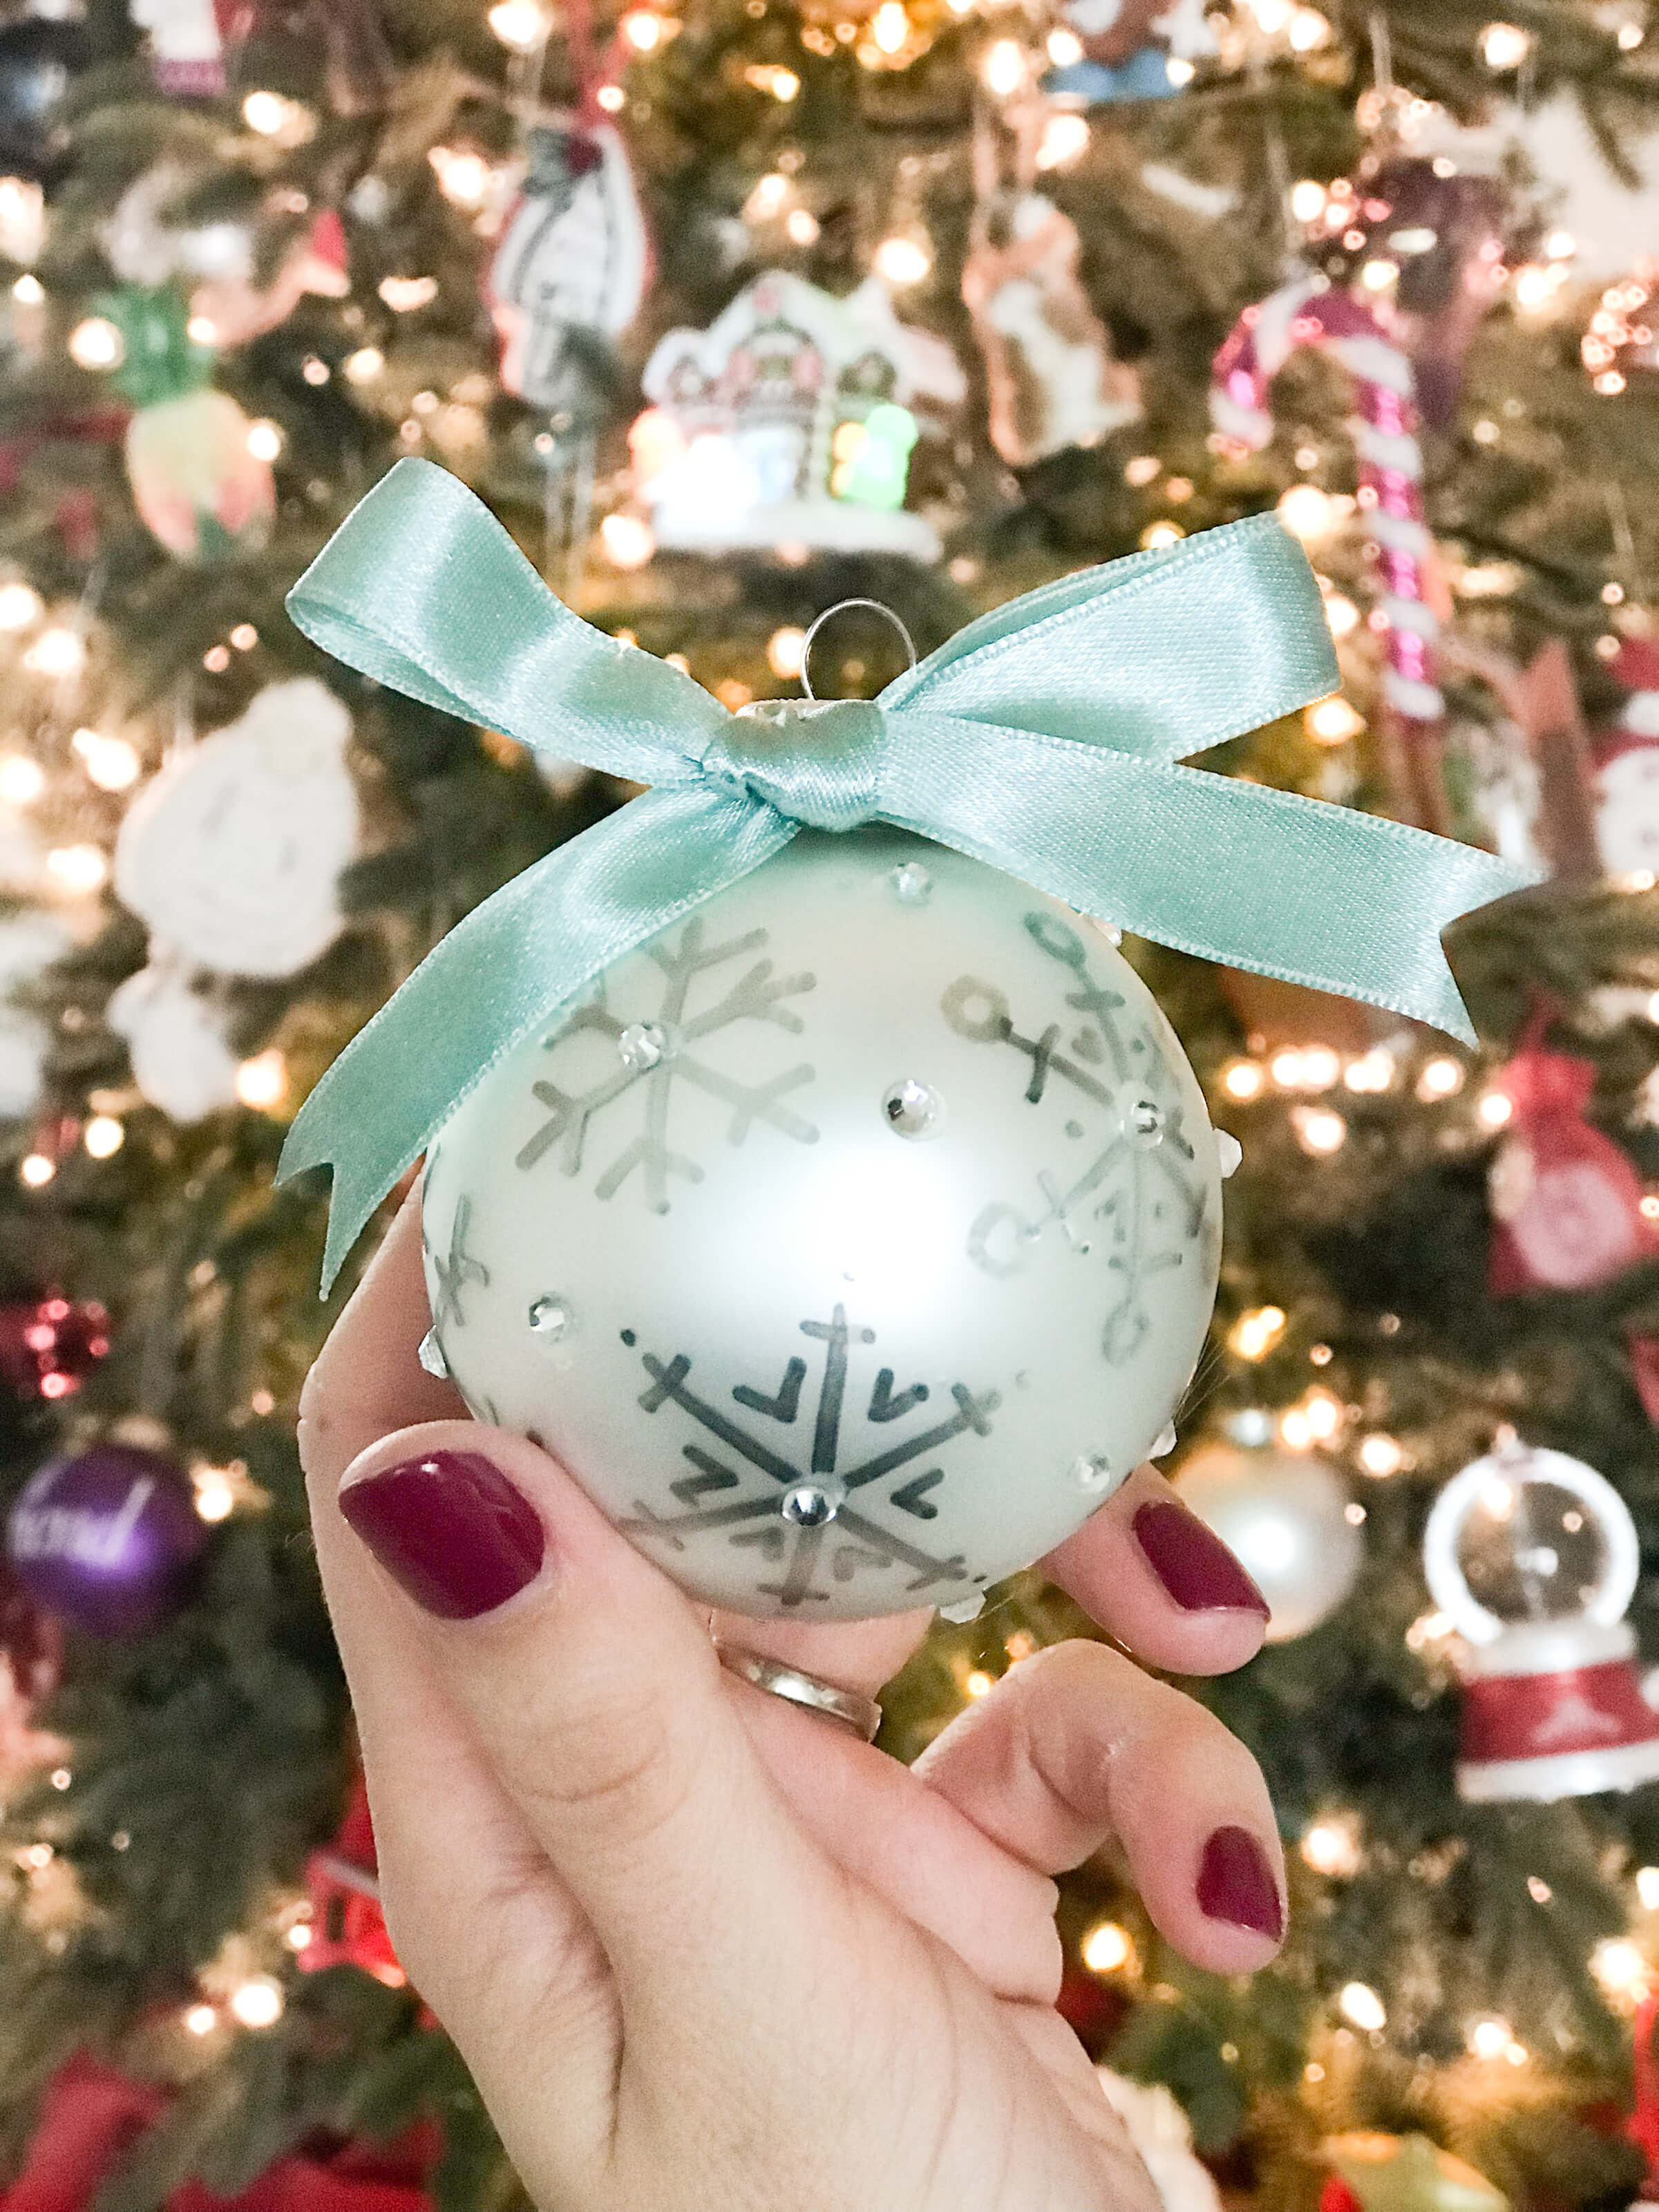 Learn how to create and bejewel your own, personalized, hand lettered Christmas ornaments with this free video tutorial and fully linked supply list from Amanda Arneill of amandaarneill.com